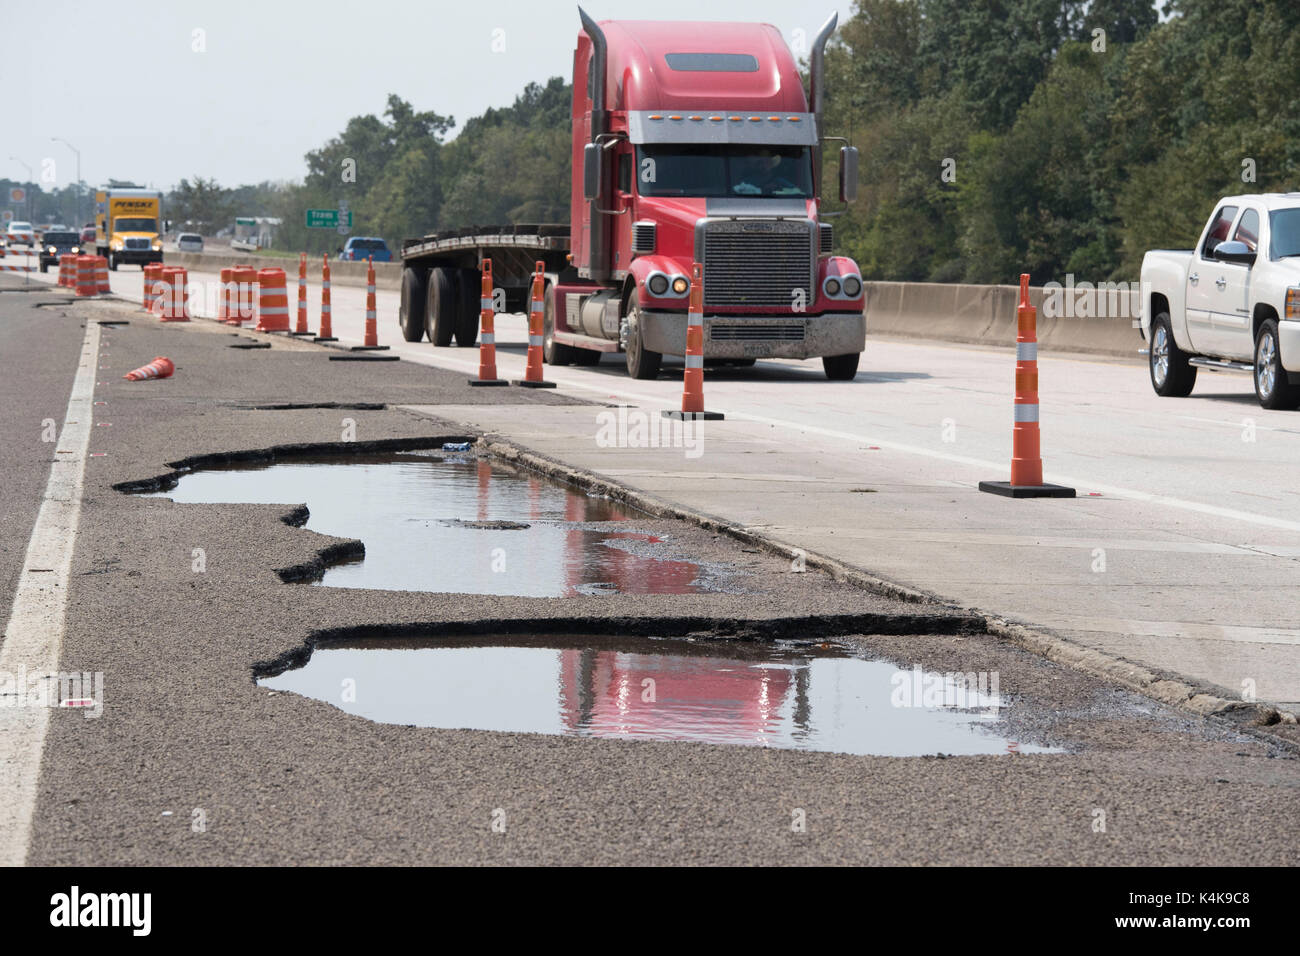 Beaumont, Texas Sept. 6, 2017: Infrastructure problems on flood-damaged roads continue to plague east Texas as it recovers from Hurricane Harvey, which hit almost two weeks ago on Aug. 25th, 2017. Credit: Bob Daemmrich/Alamy Live News Stock Photo